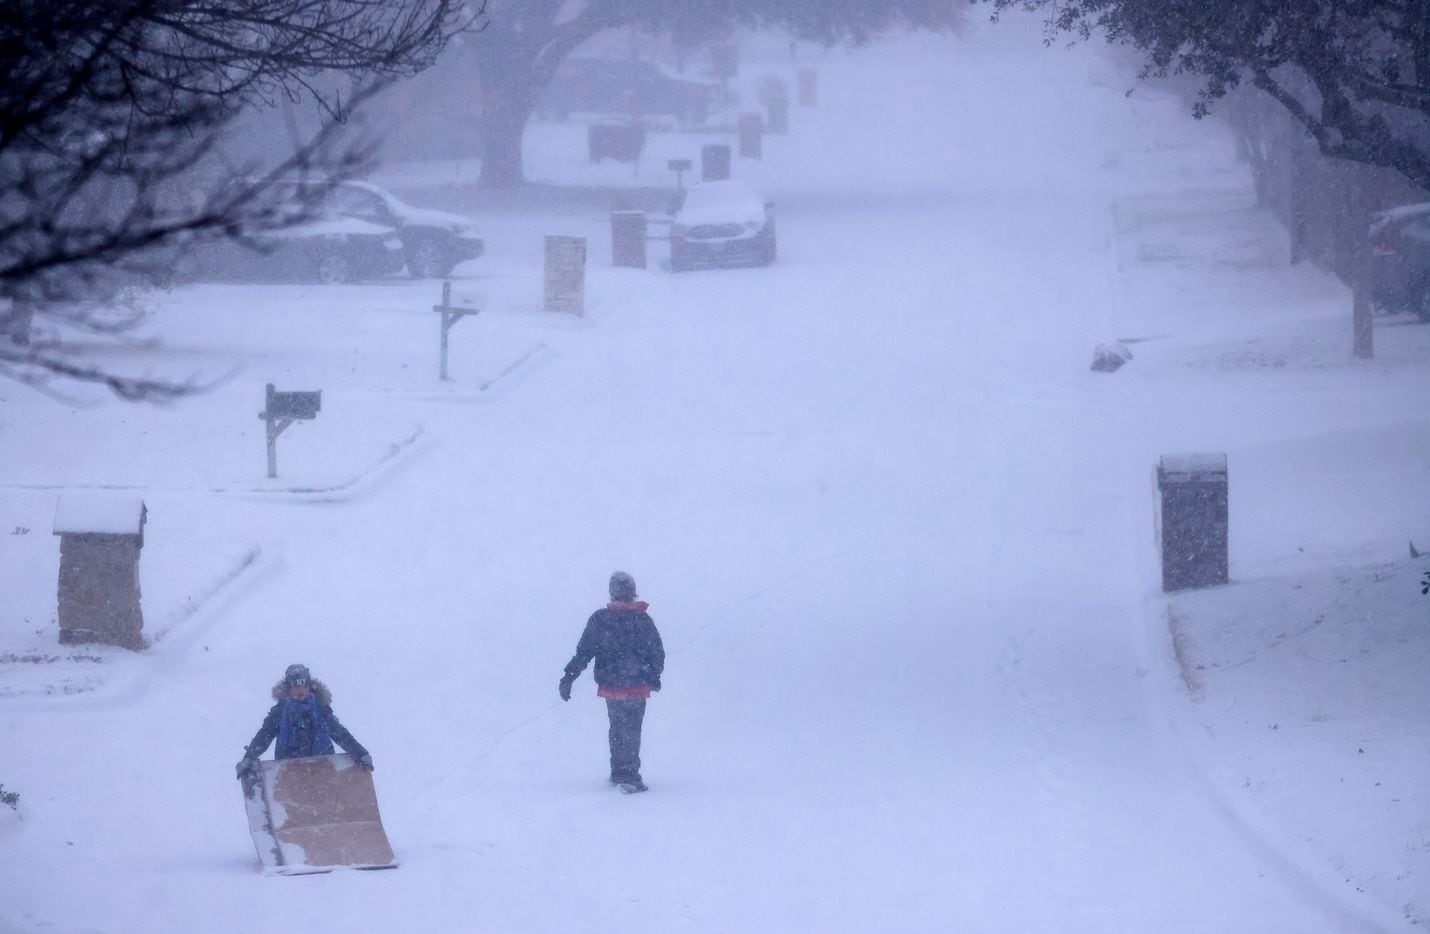 Kids improvised by sledding on large pieces of cardboard down a steep, snow-covered street...